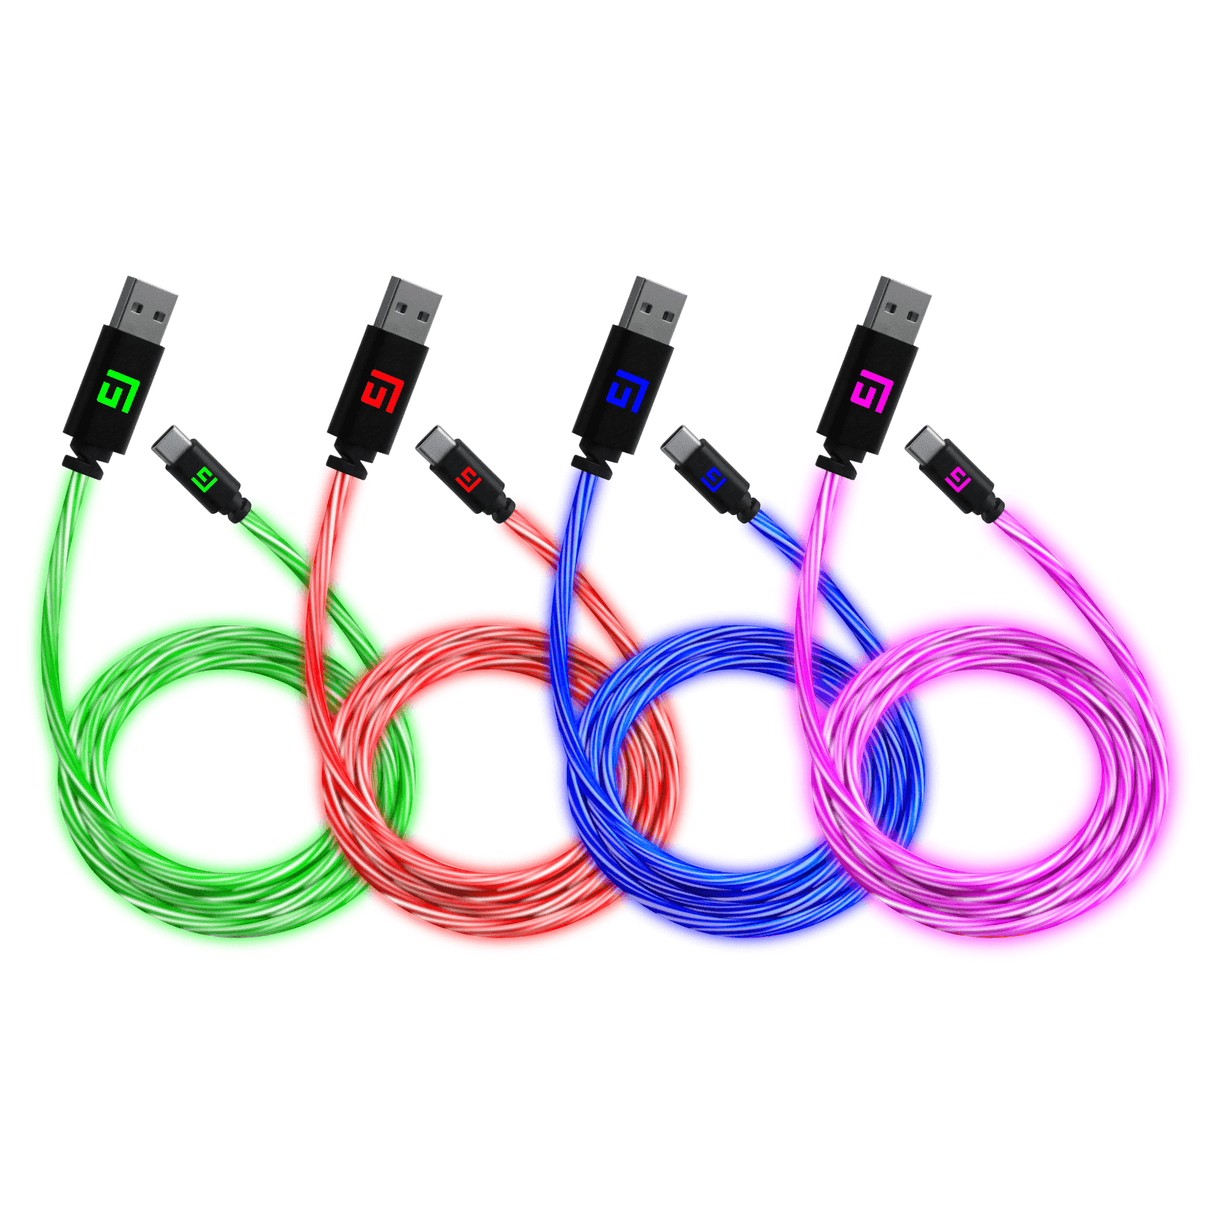 0,5M/2ft LED USB-C/USB-A Cable | High-Speed Charging + Sync (4 Pack) - FLOATING GRIP